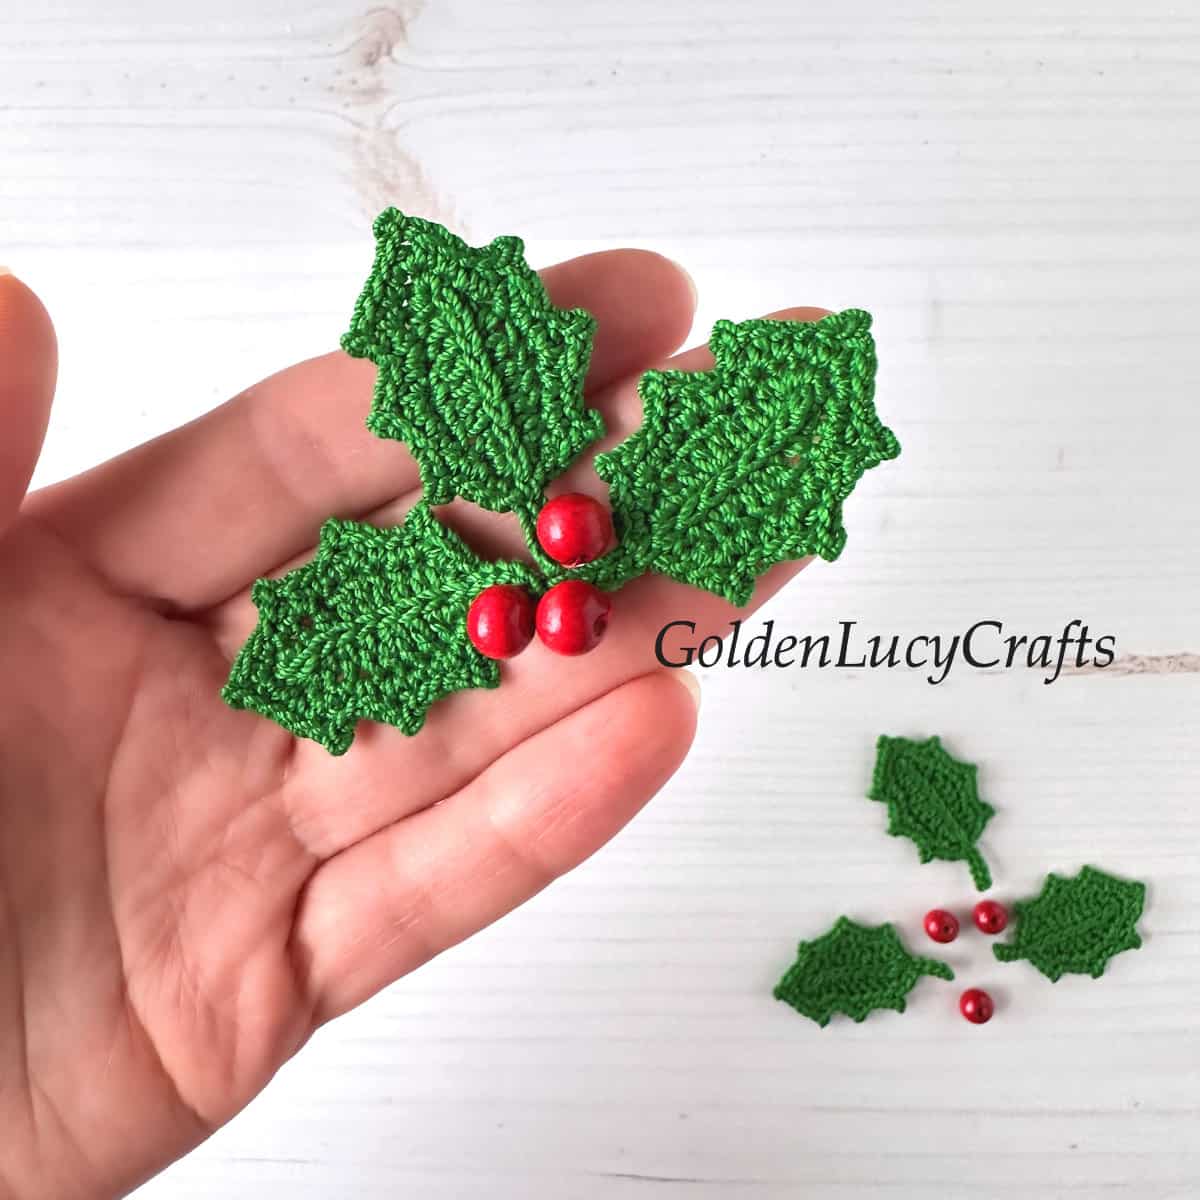 Crochet holly applique in the palm of a hand.